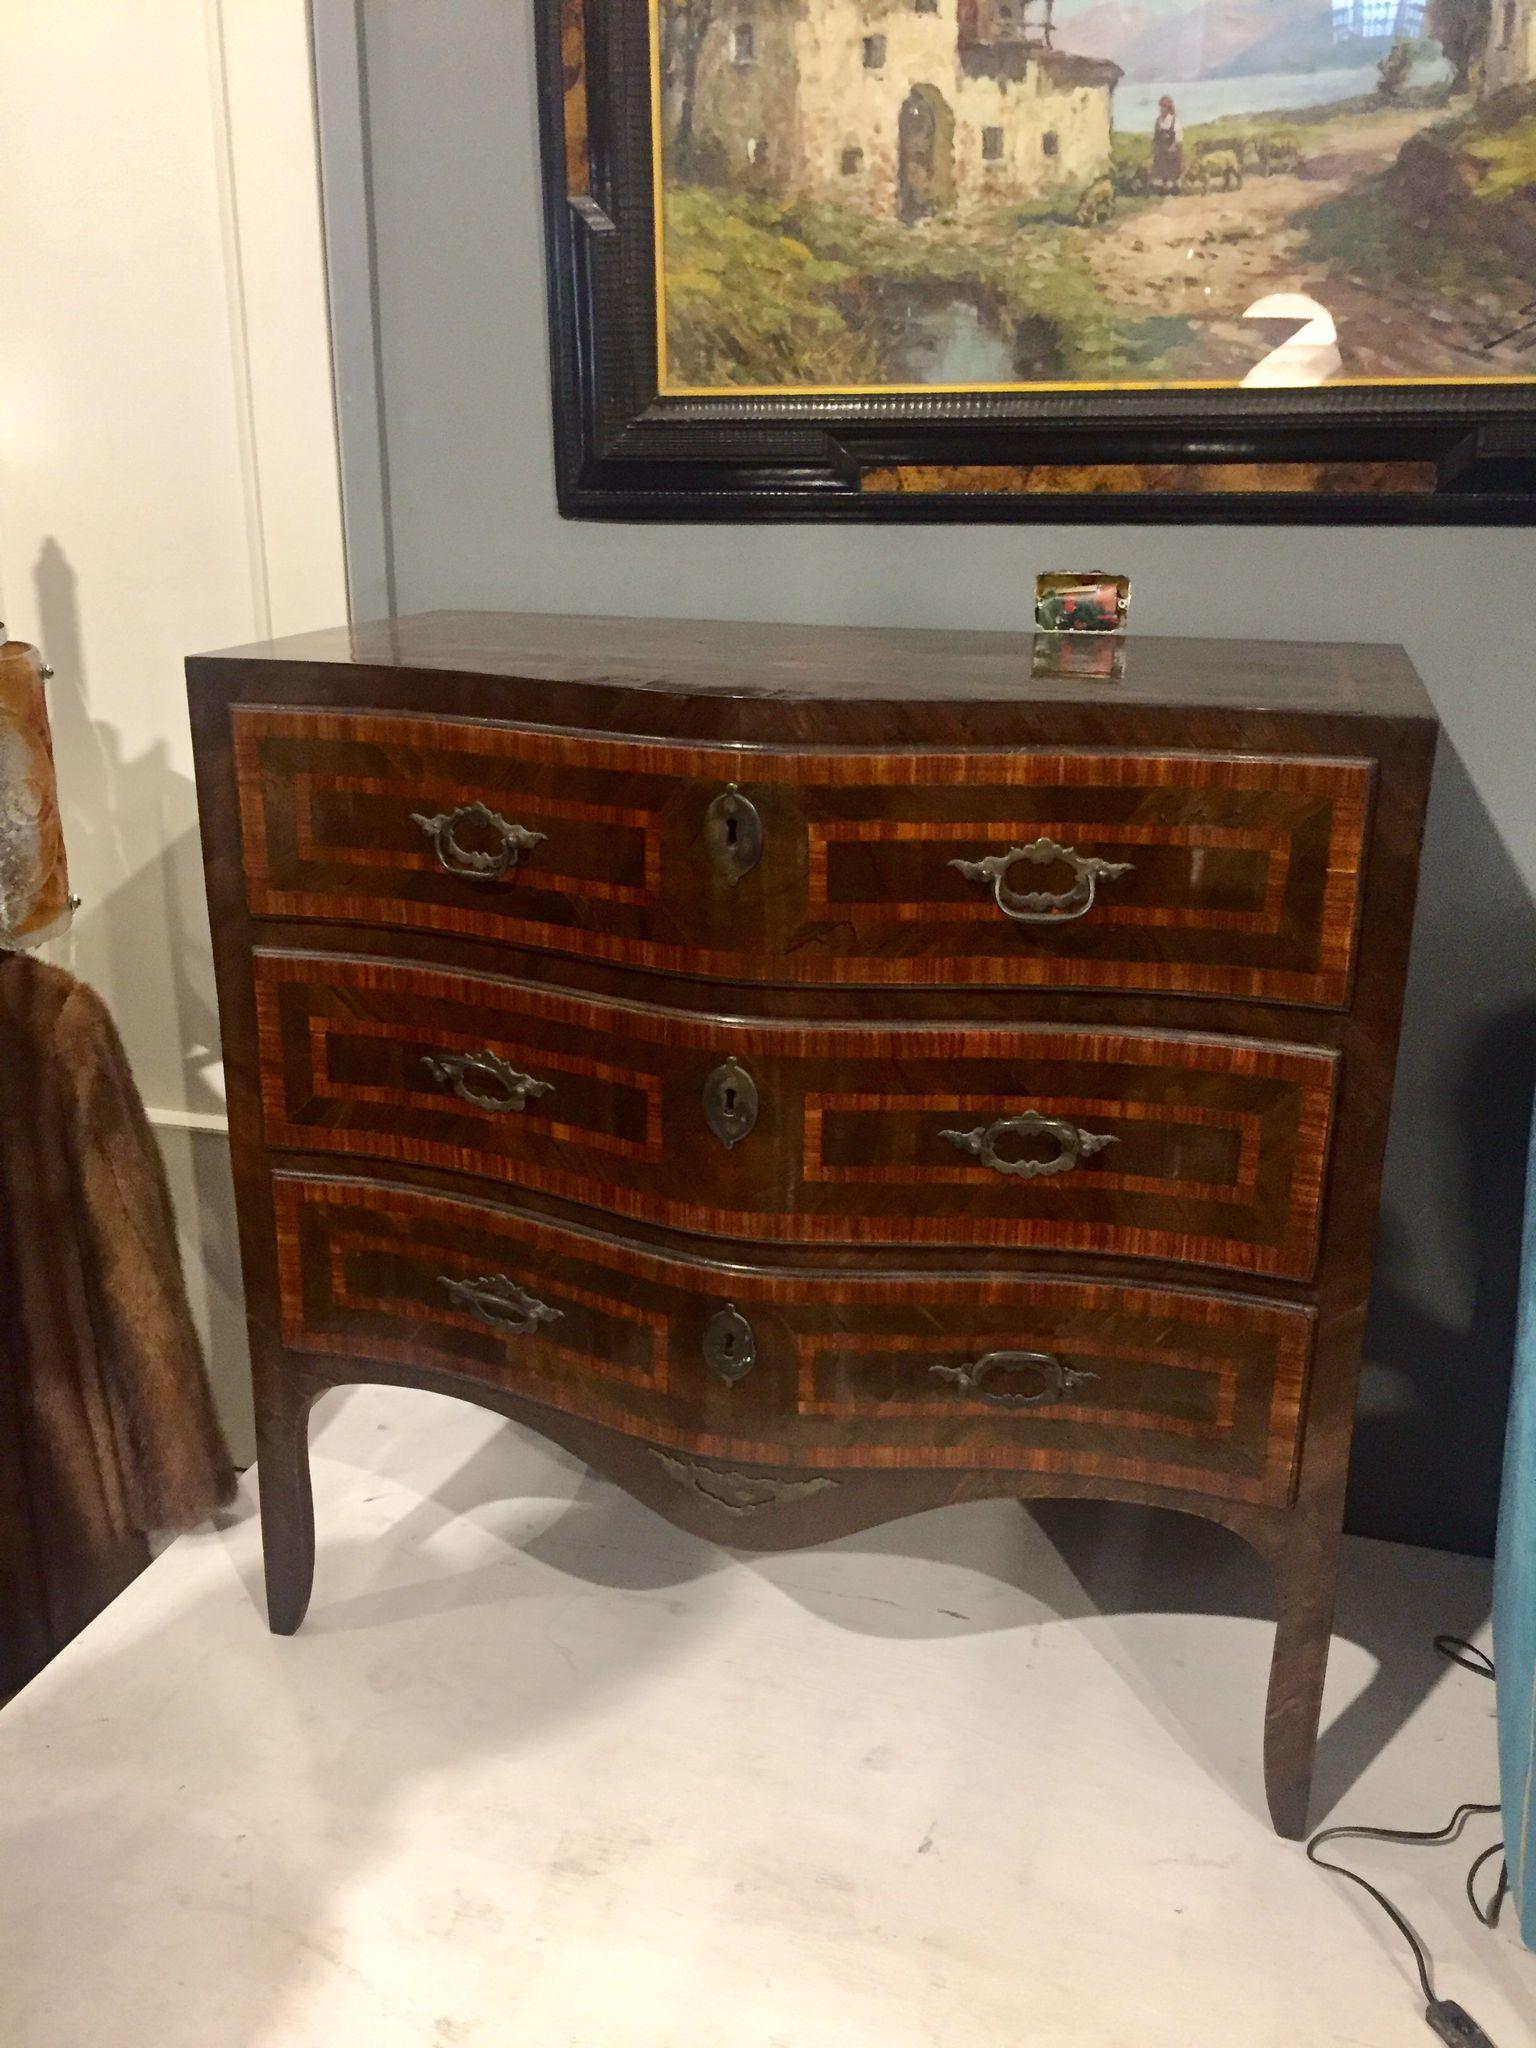 Louis XV, Sicilian Chest of Drawers in Rio Rosewood, Three Drawers, bronze handles.
Amazing Chest of drawers with three drawers in Rio Rosewood, with decorations and inserts in precious woods, particularly the geometric decoration, typical of that